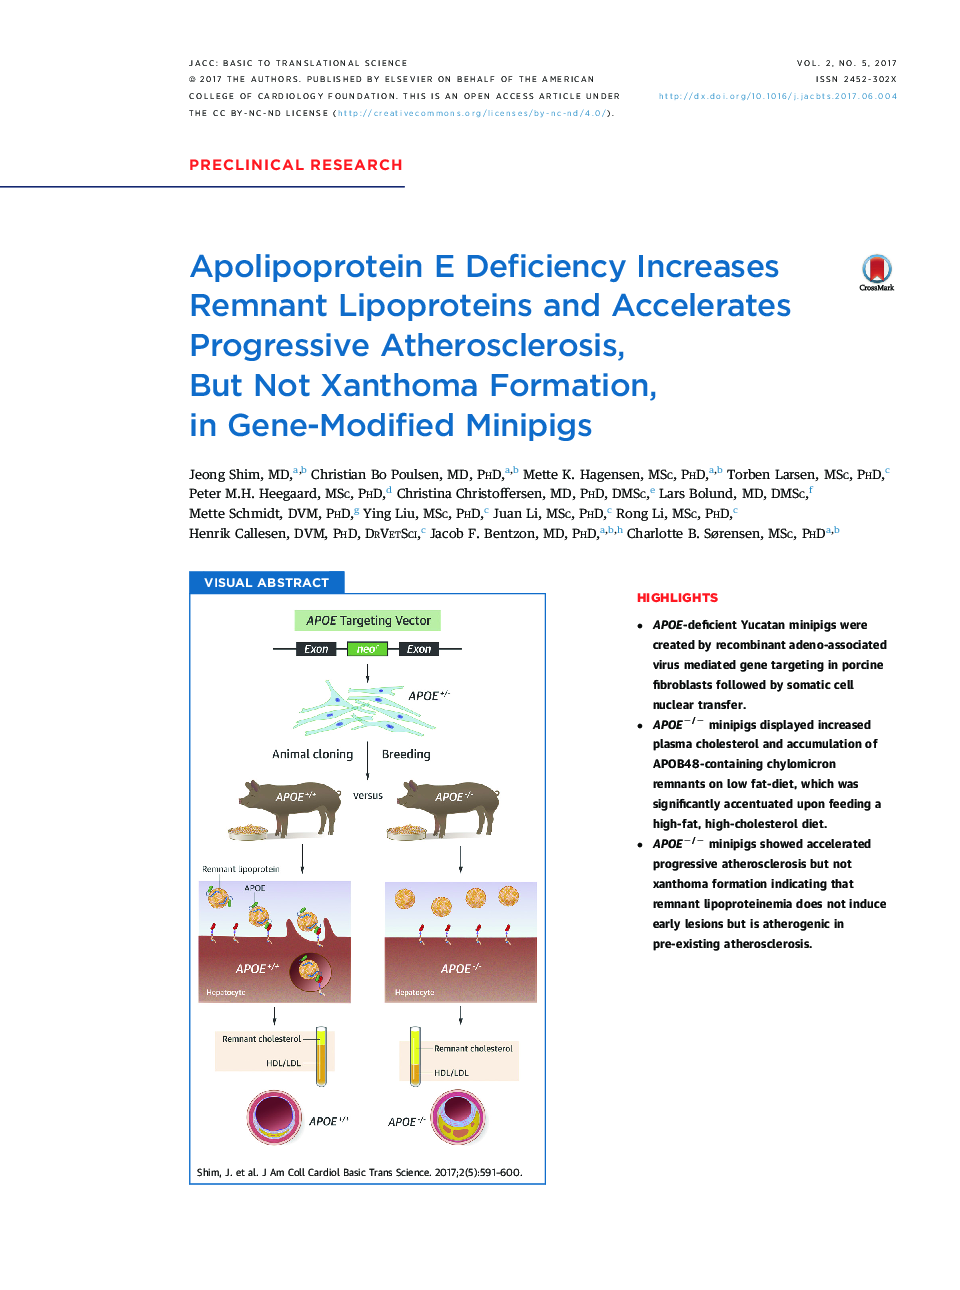 Apolipoprotein E Deficiency Increases Remnant Lipoproteins and Accelerates Progressive Atherosclerosis, But NotÂ Xanthoma Formation, in Gene-Modified Minipigs